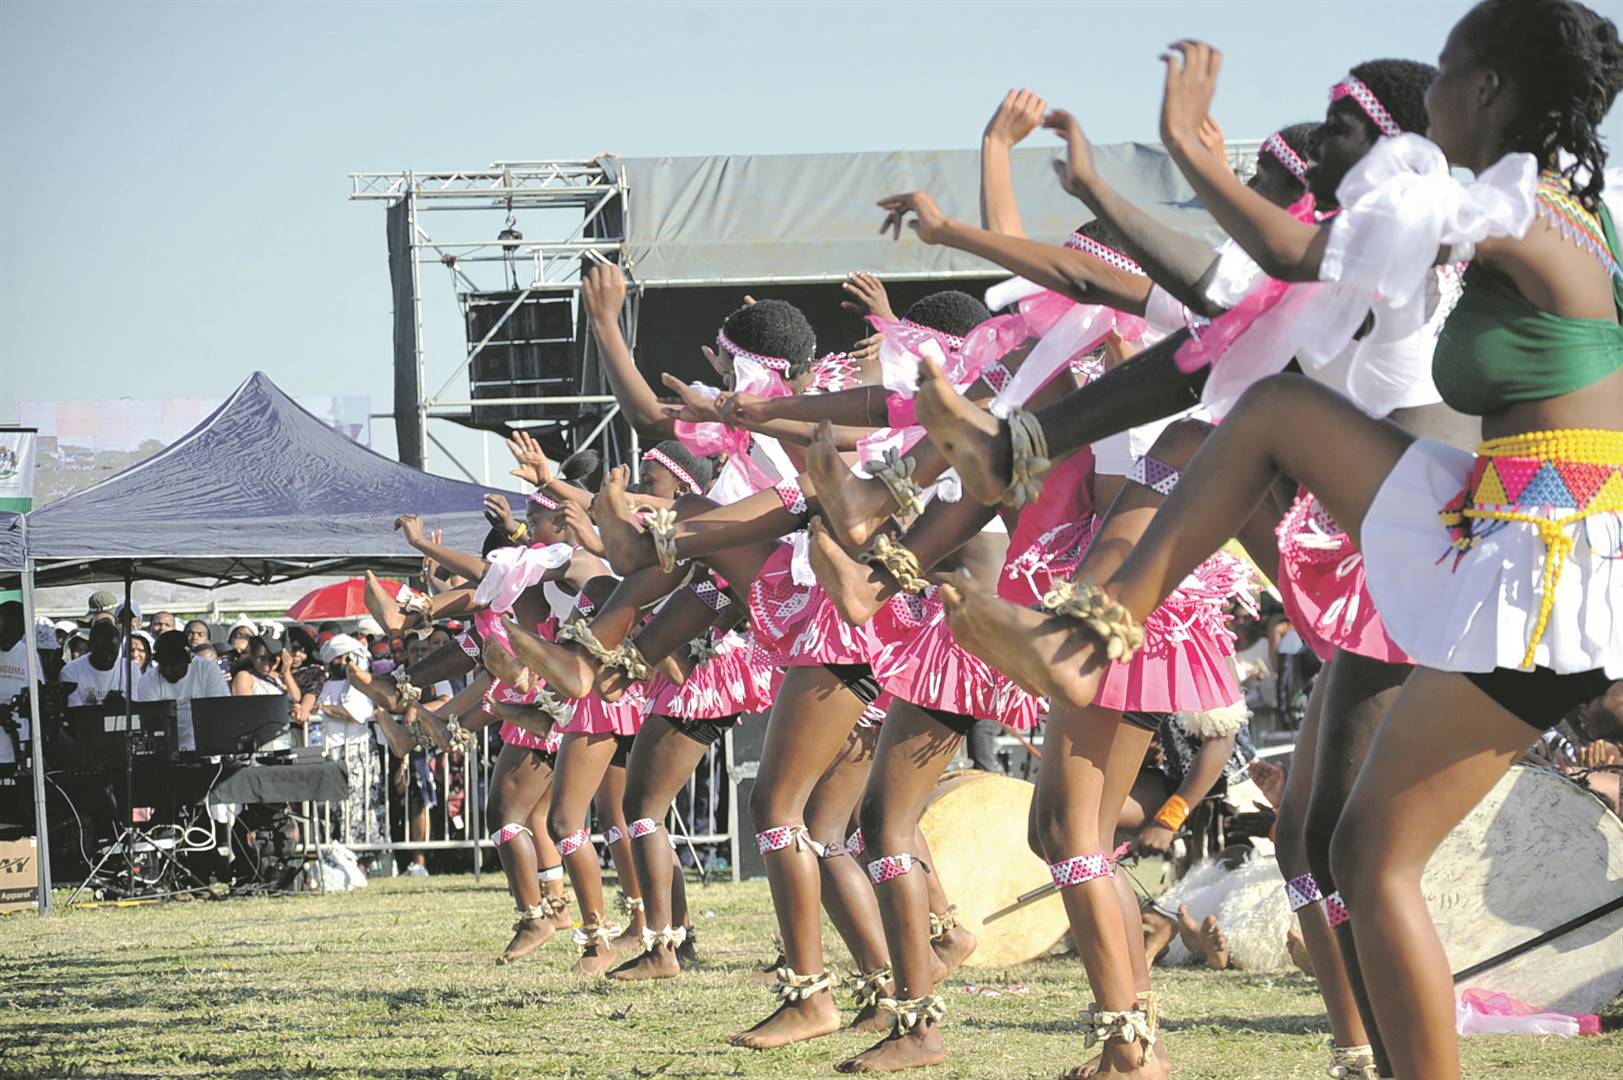 Ikusaselihle show off their dance moves during the festival.